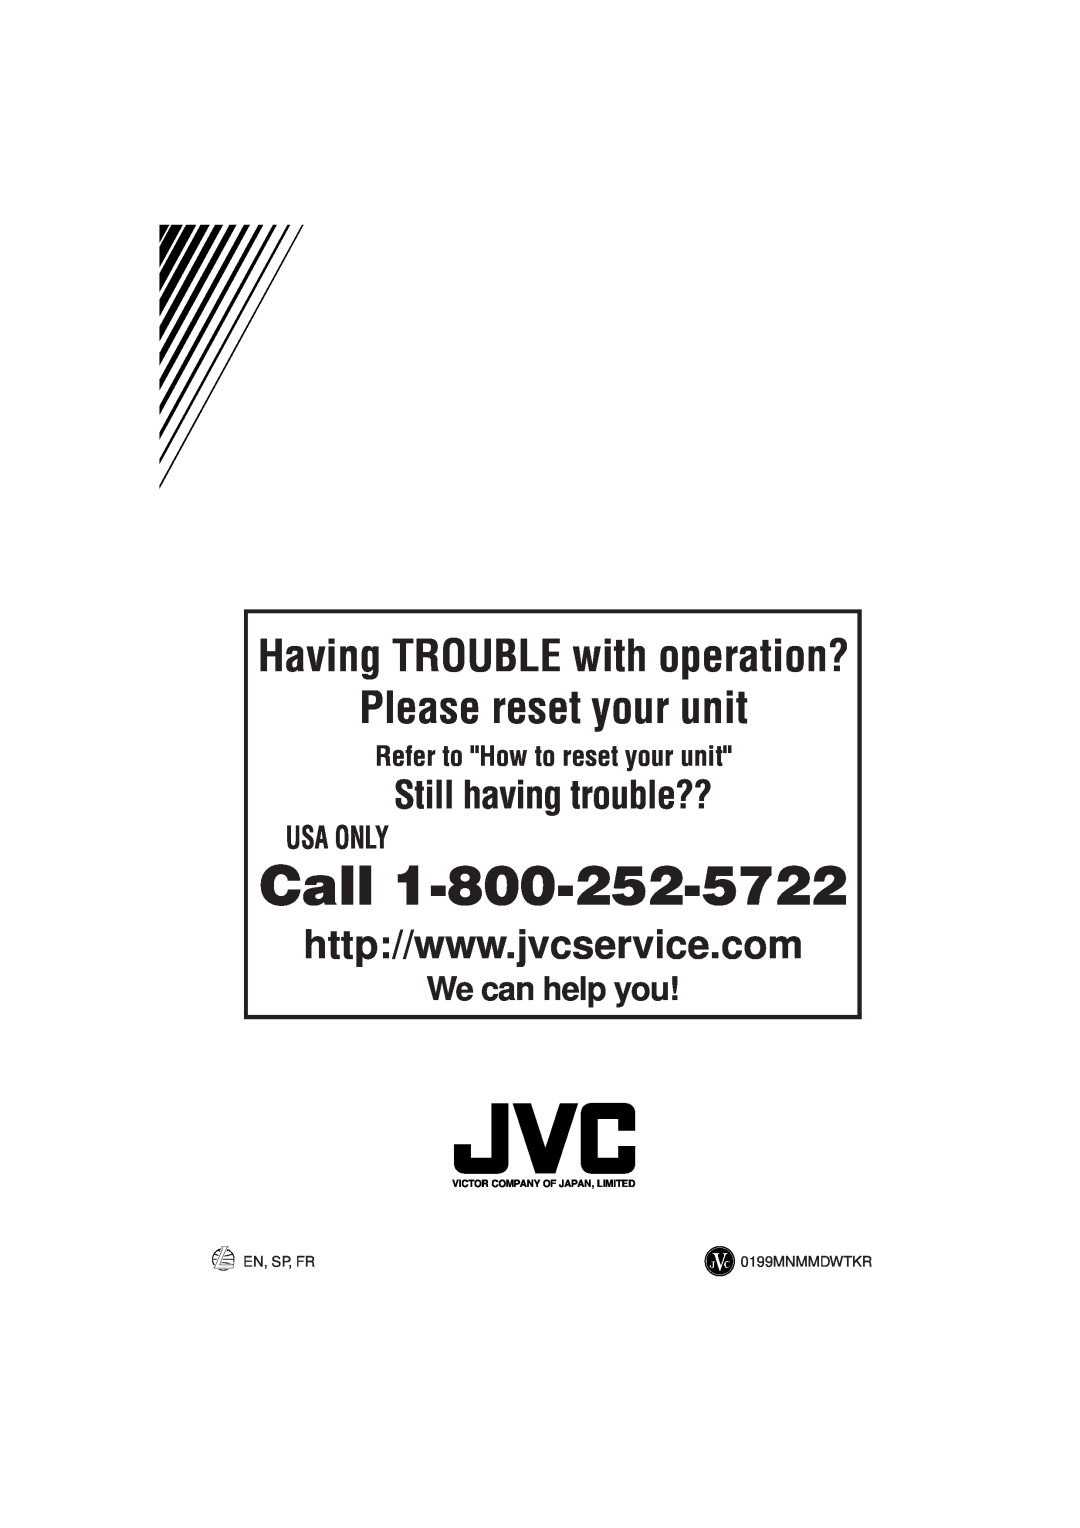 JVC KV-RA2 Call, Please reset your unit, Having TROUBLE with operation?, Still having trouble??, We can help you, Usa Only 